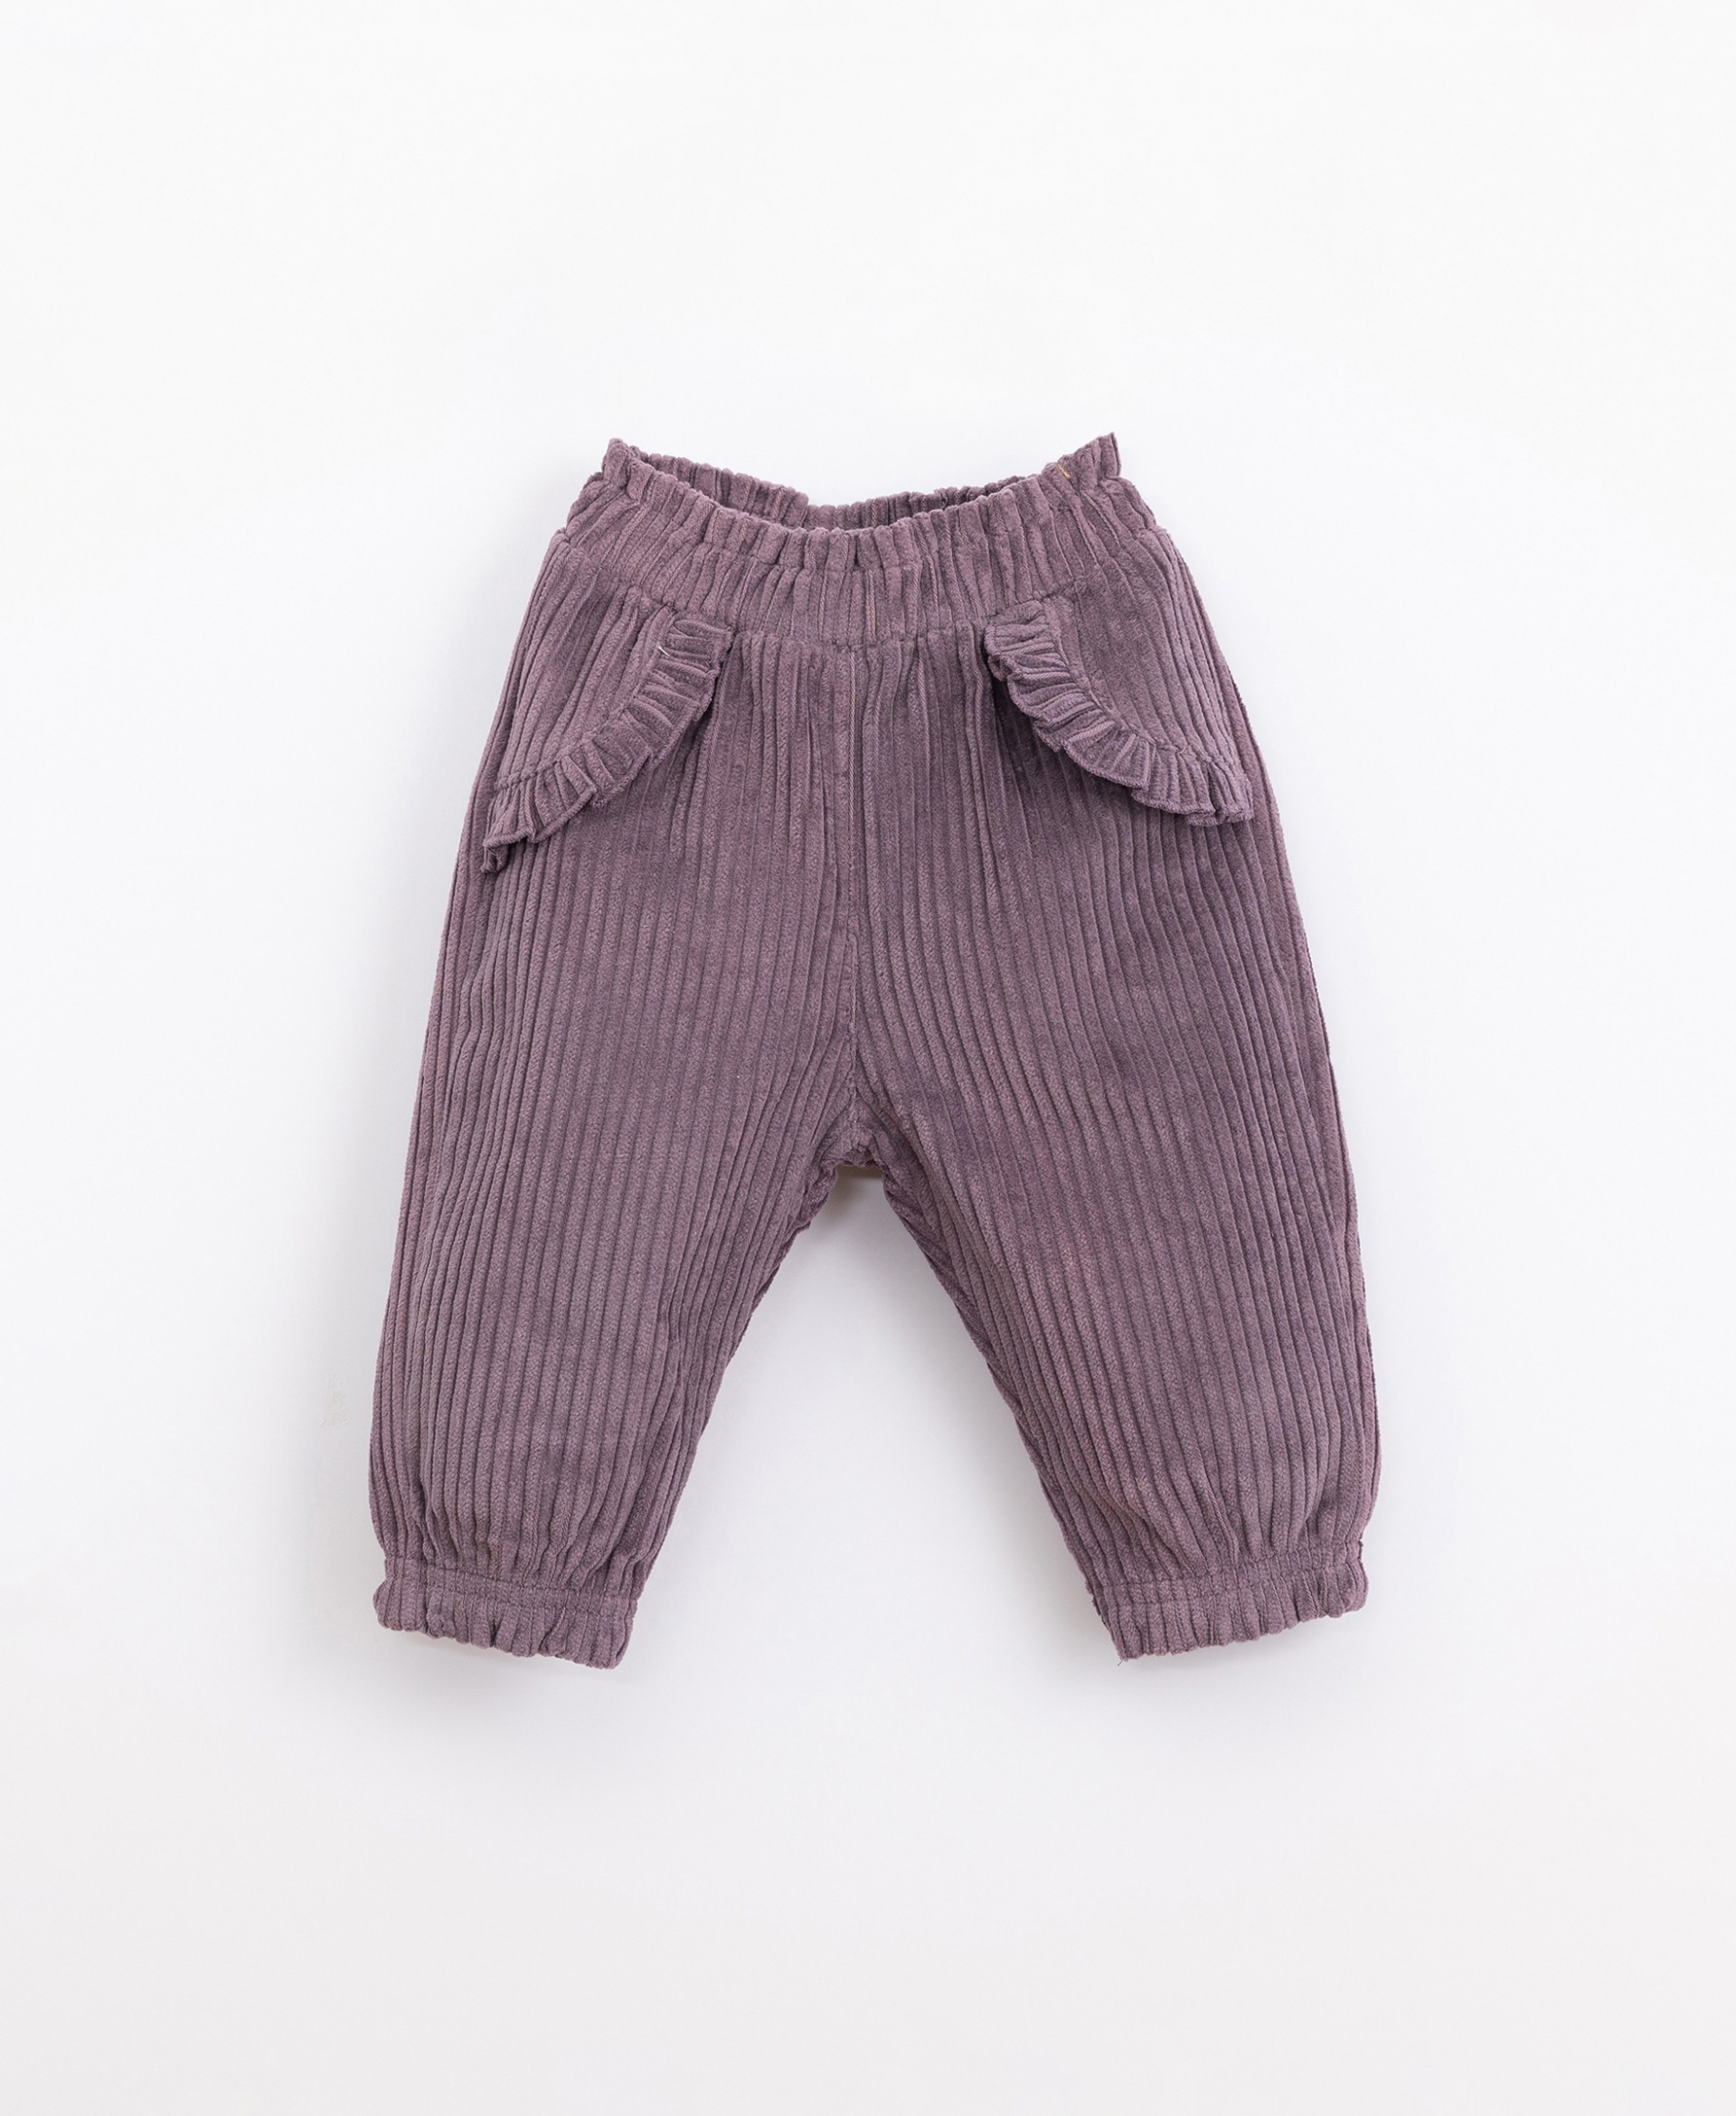 Corduroy trousers with false pockets | Illustration